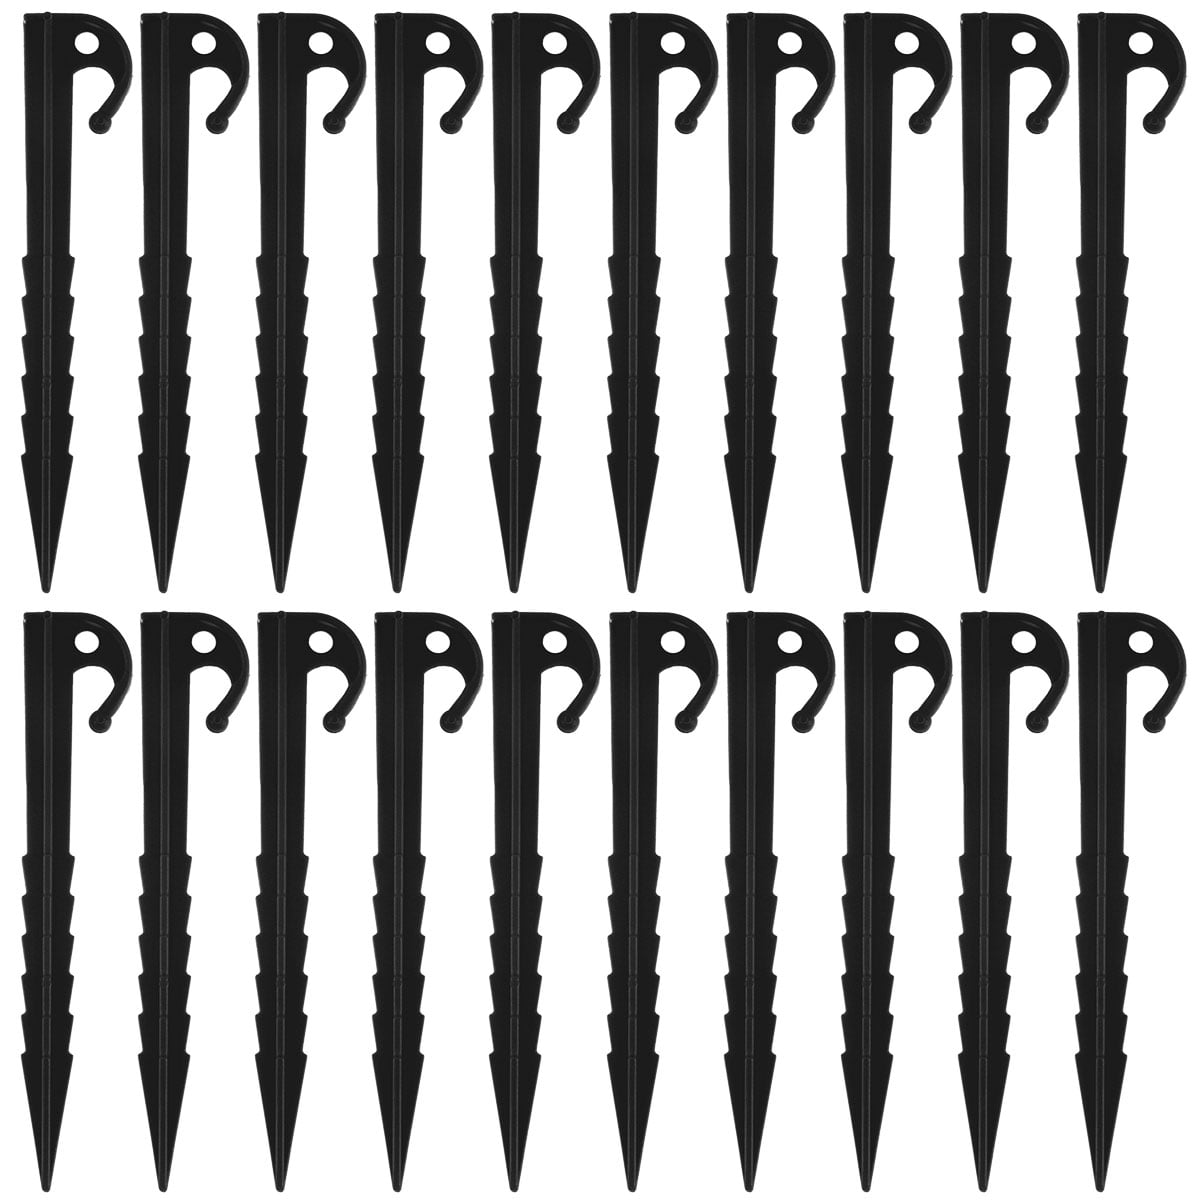 20 pcs 10 inch Metal Heavy Duty Tent Pegs Hard Ground Tent & Awning Camping Pegs Camping Stakes Pegs Accessories for Camping Awning Traveling Netting Tarp 